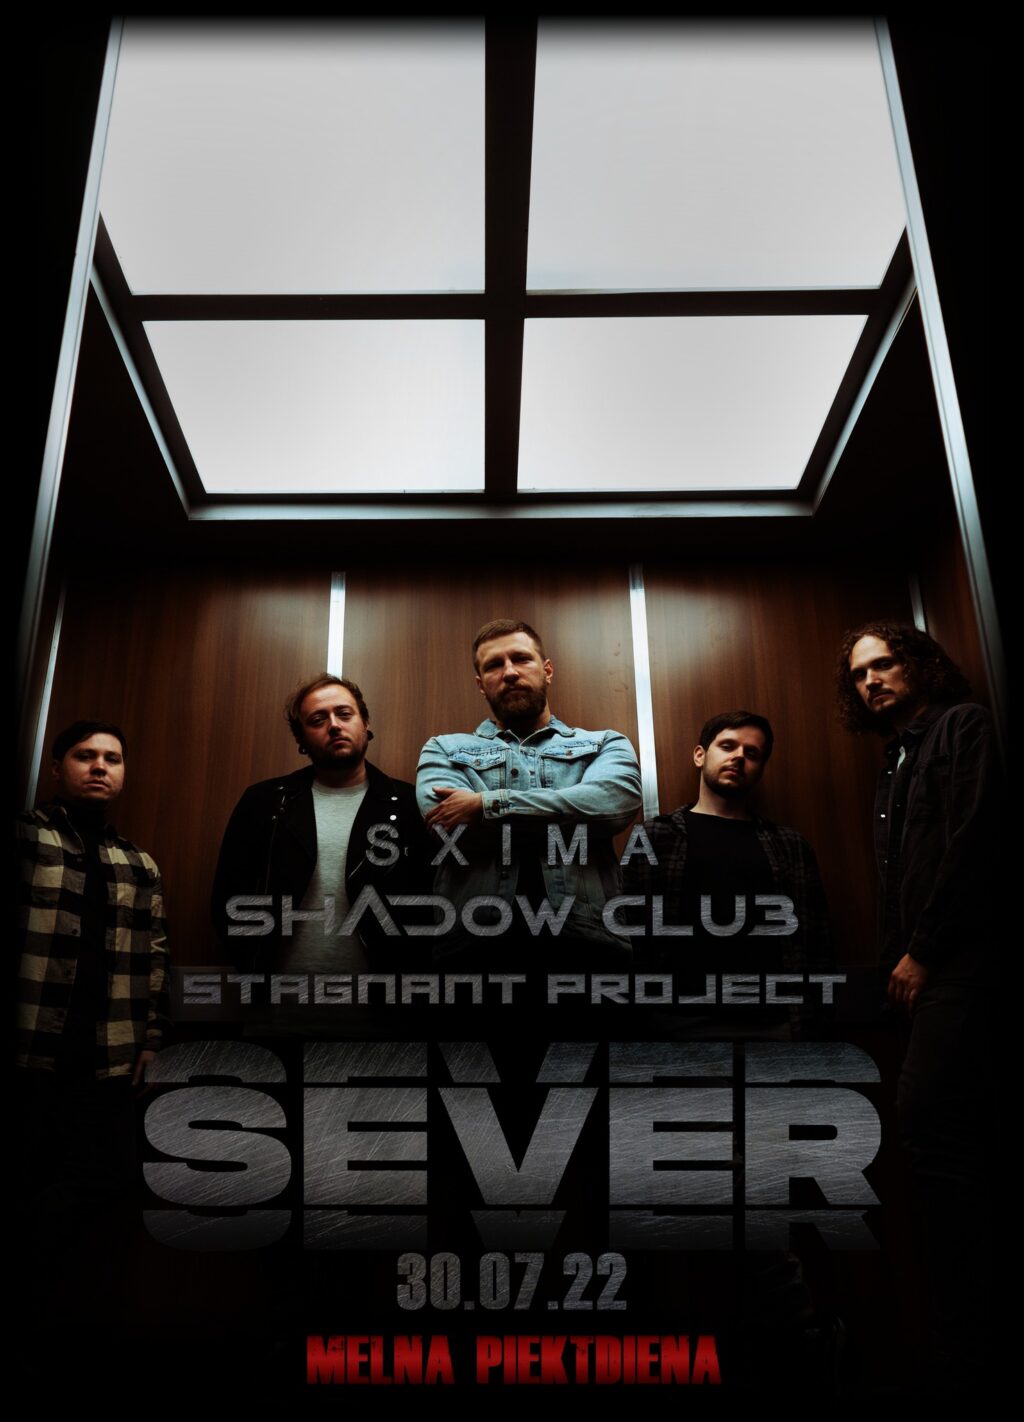 SEVER / SHADOW CLUB / STAGNANT PROJECT / SXIMA